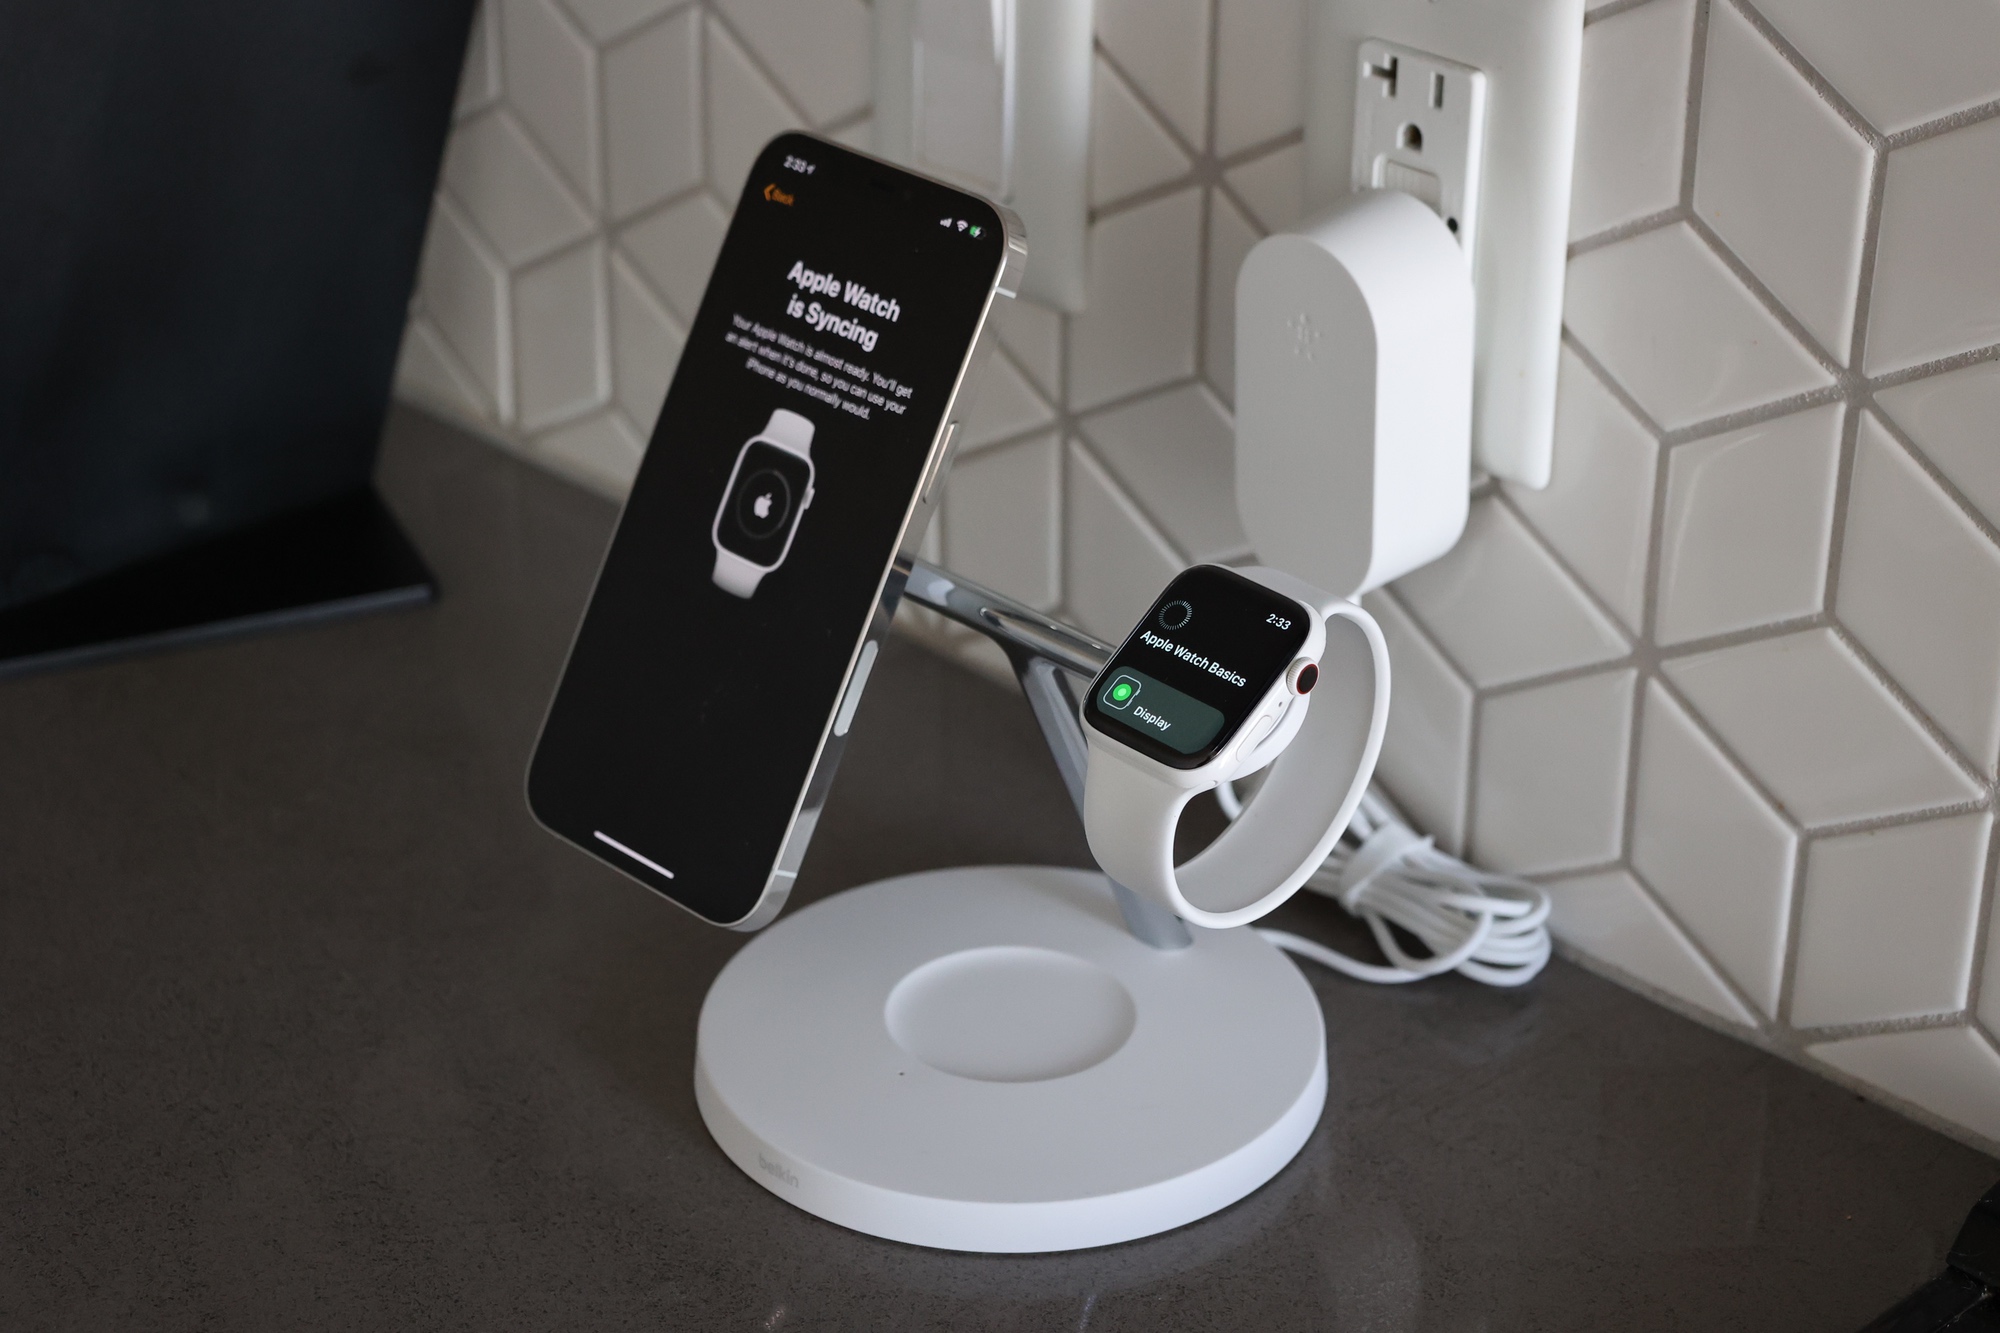 2-in-1 Wireless Charging Pad with MagSafe (15W) | Belkin US